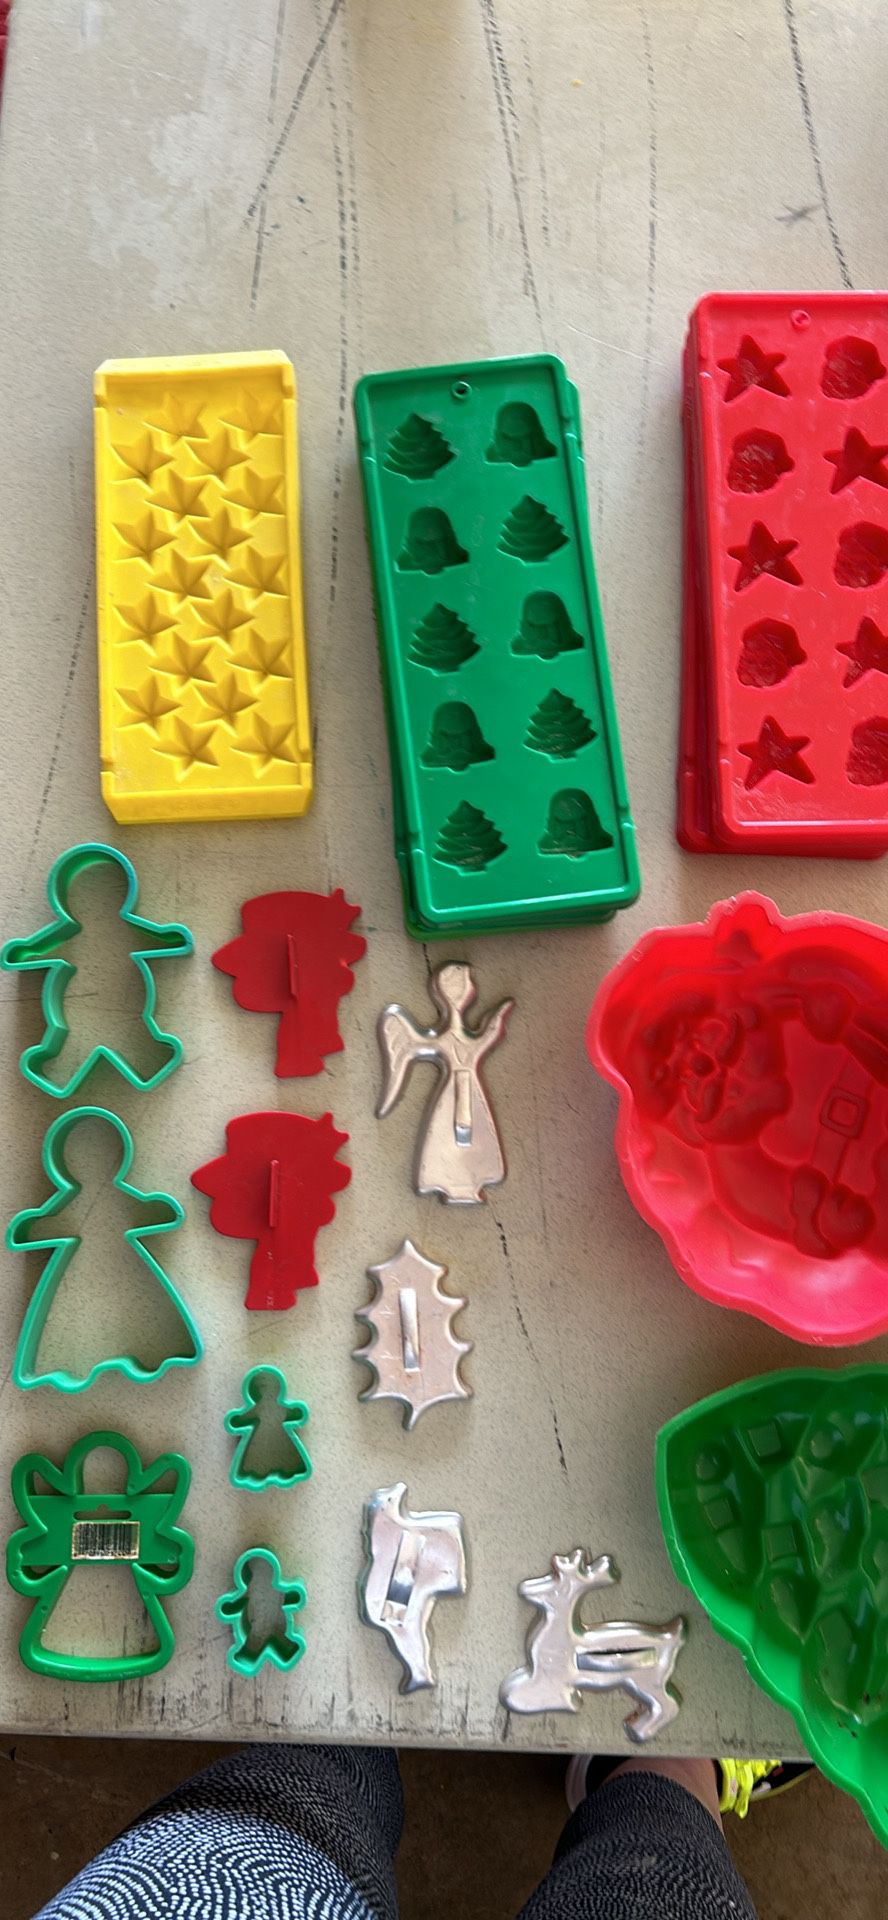 Baking, Jello And Candy Molds